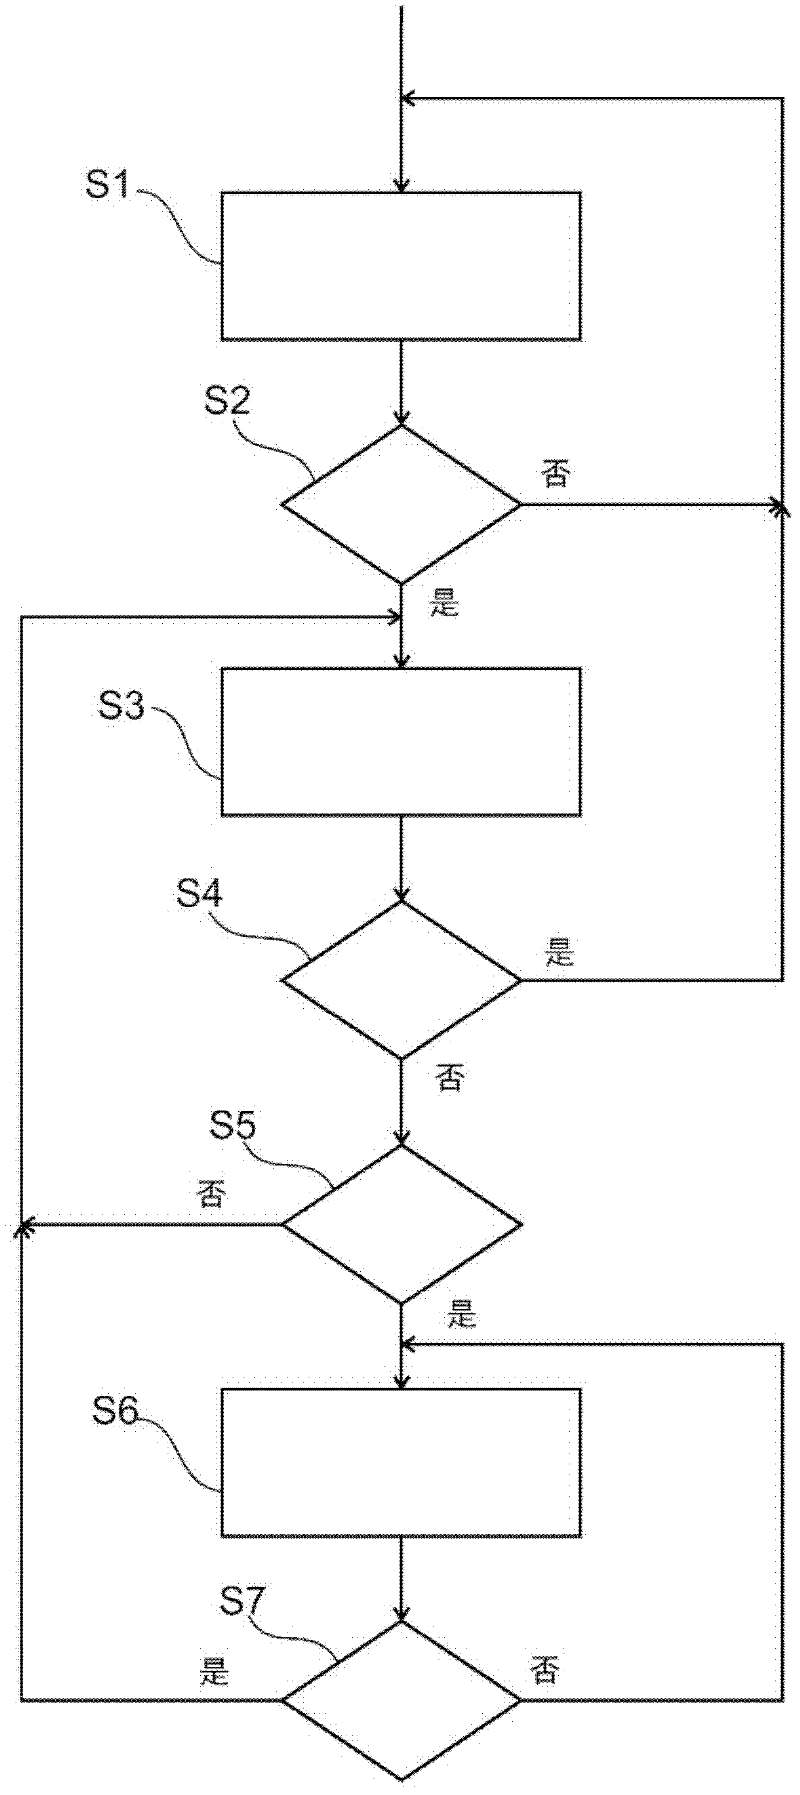 Spectral doppler ultrasound imaging device and method for automaticly controlling same